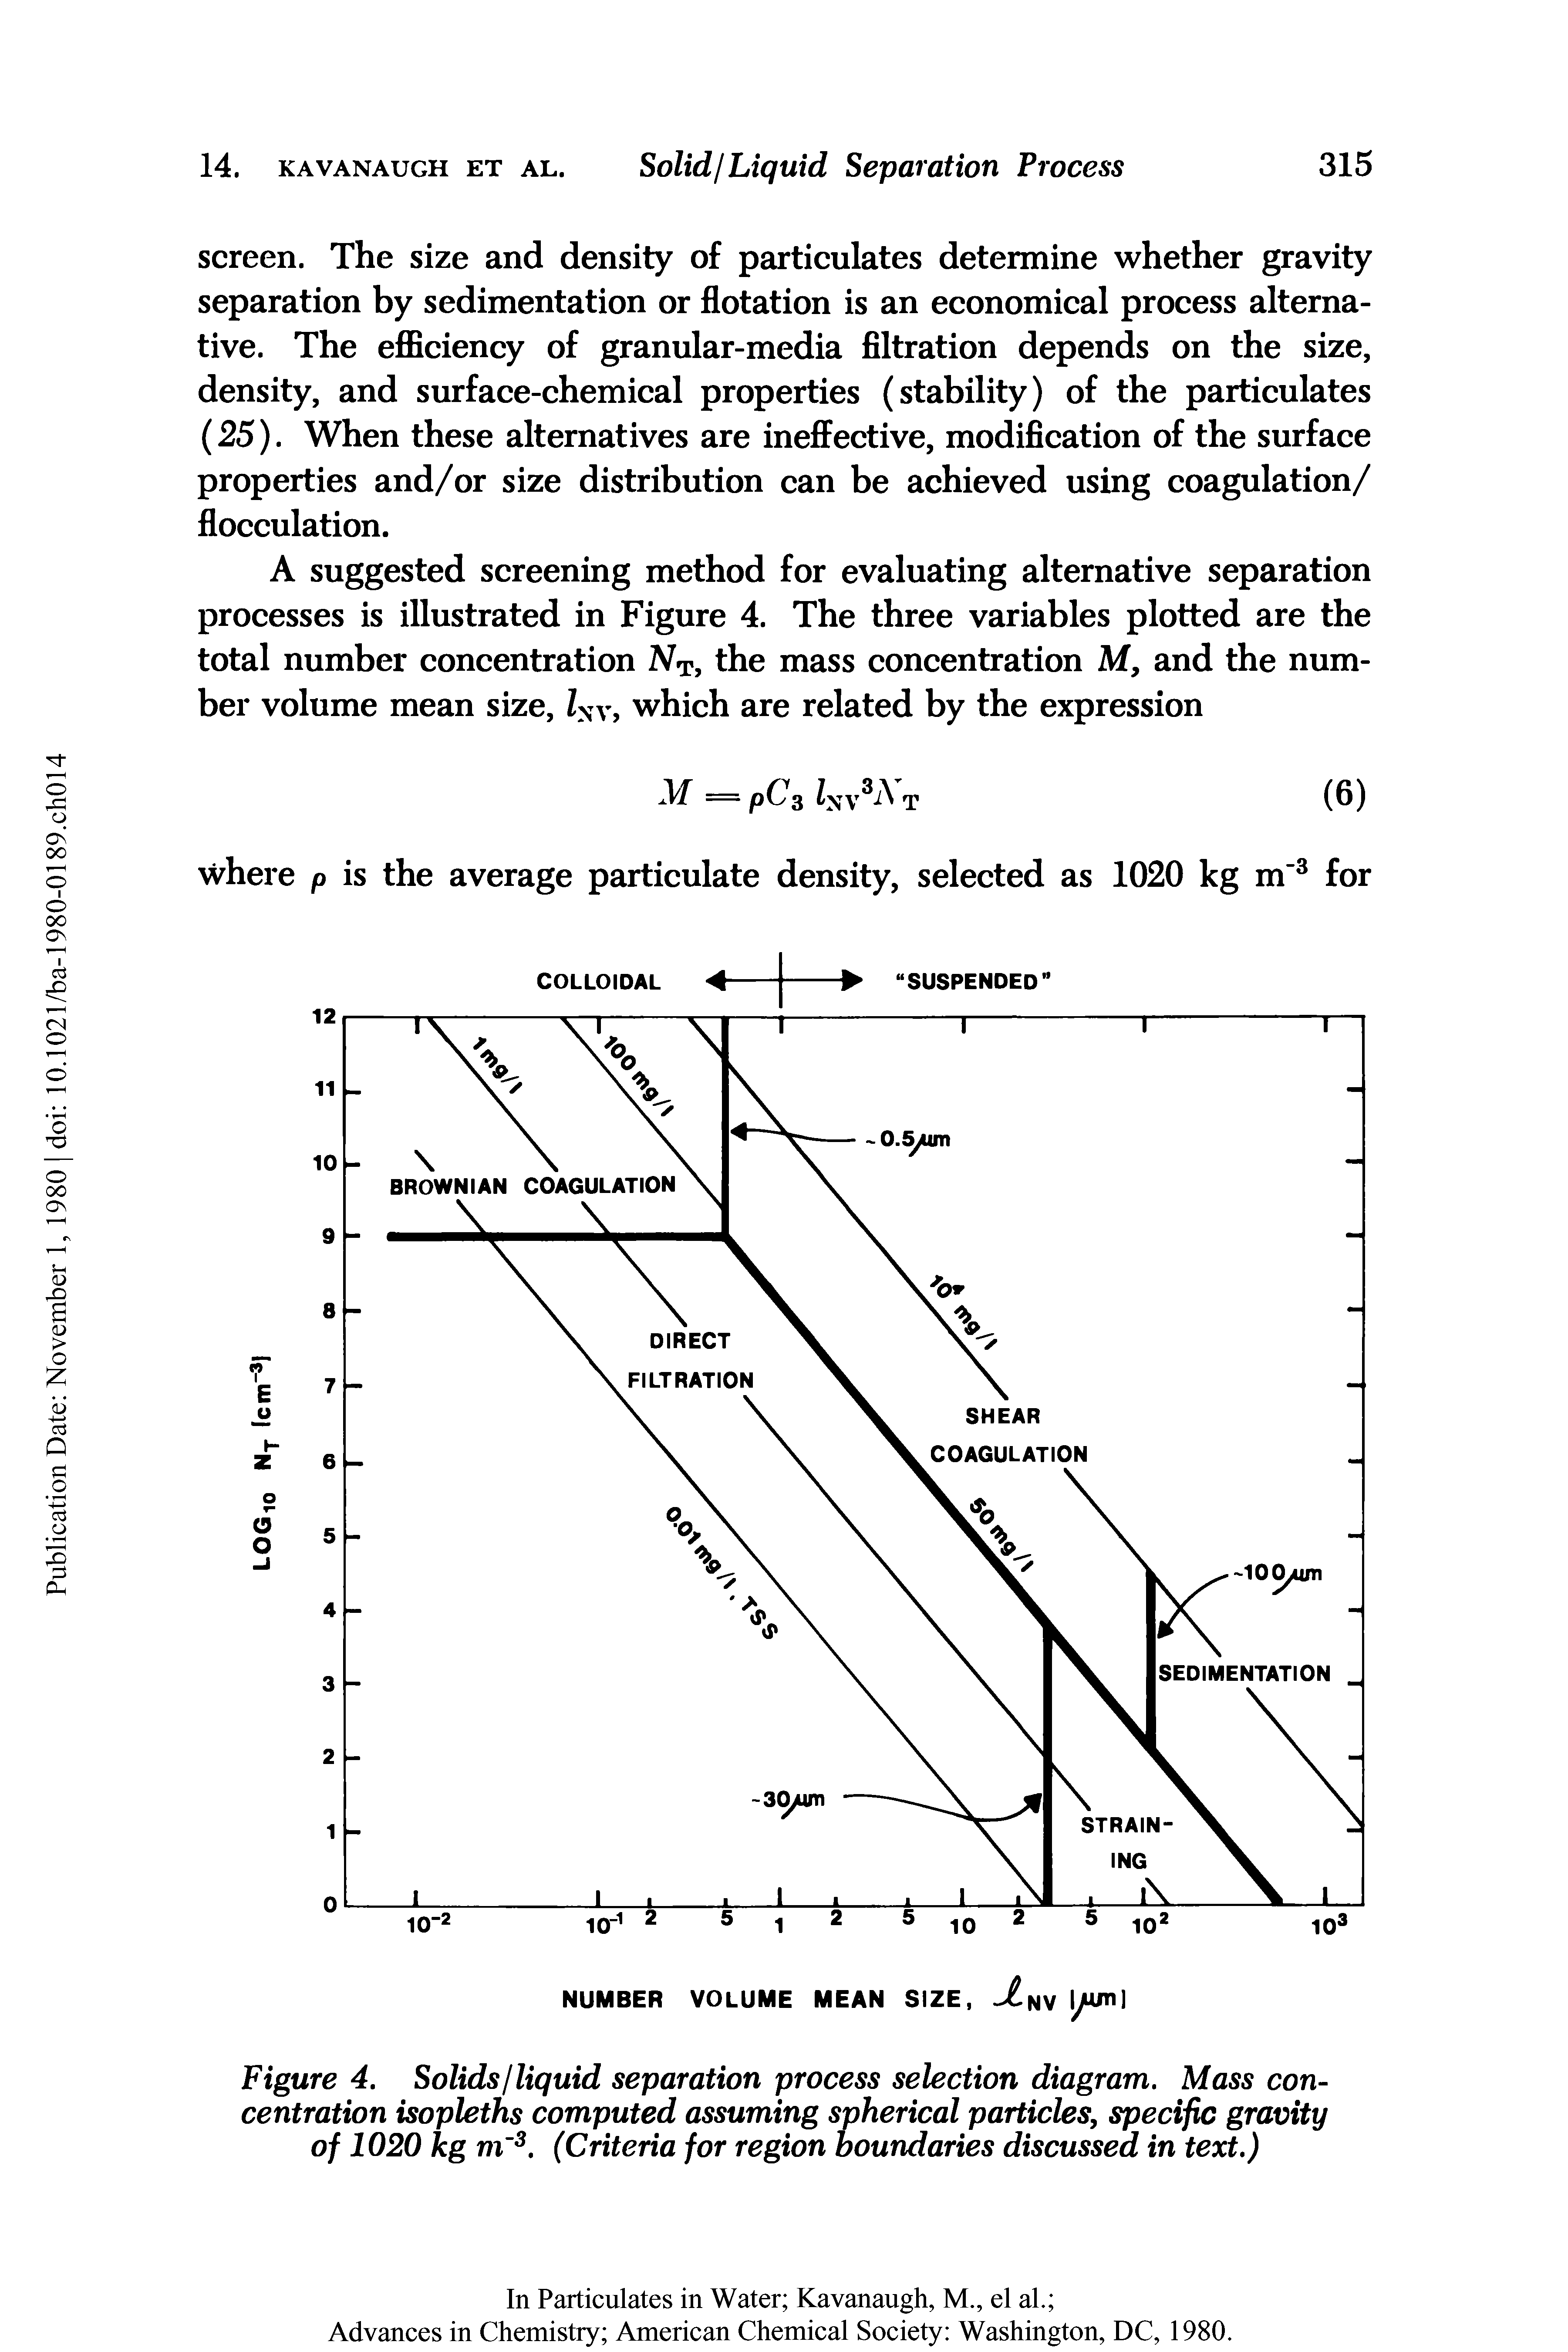 Figure 4. Solids/liquid separation process selection diagram. Mass concentration isopleths computed assuming spherical particles, specific gravity of 1020 kg m. (Criteria for region boundaries discussed in text.)...